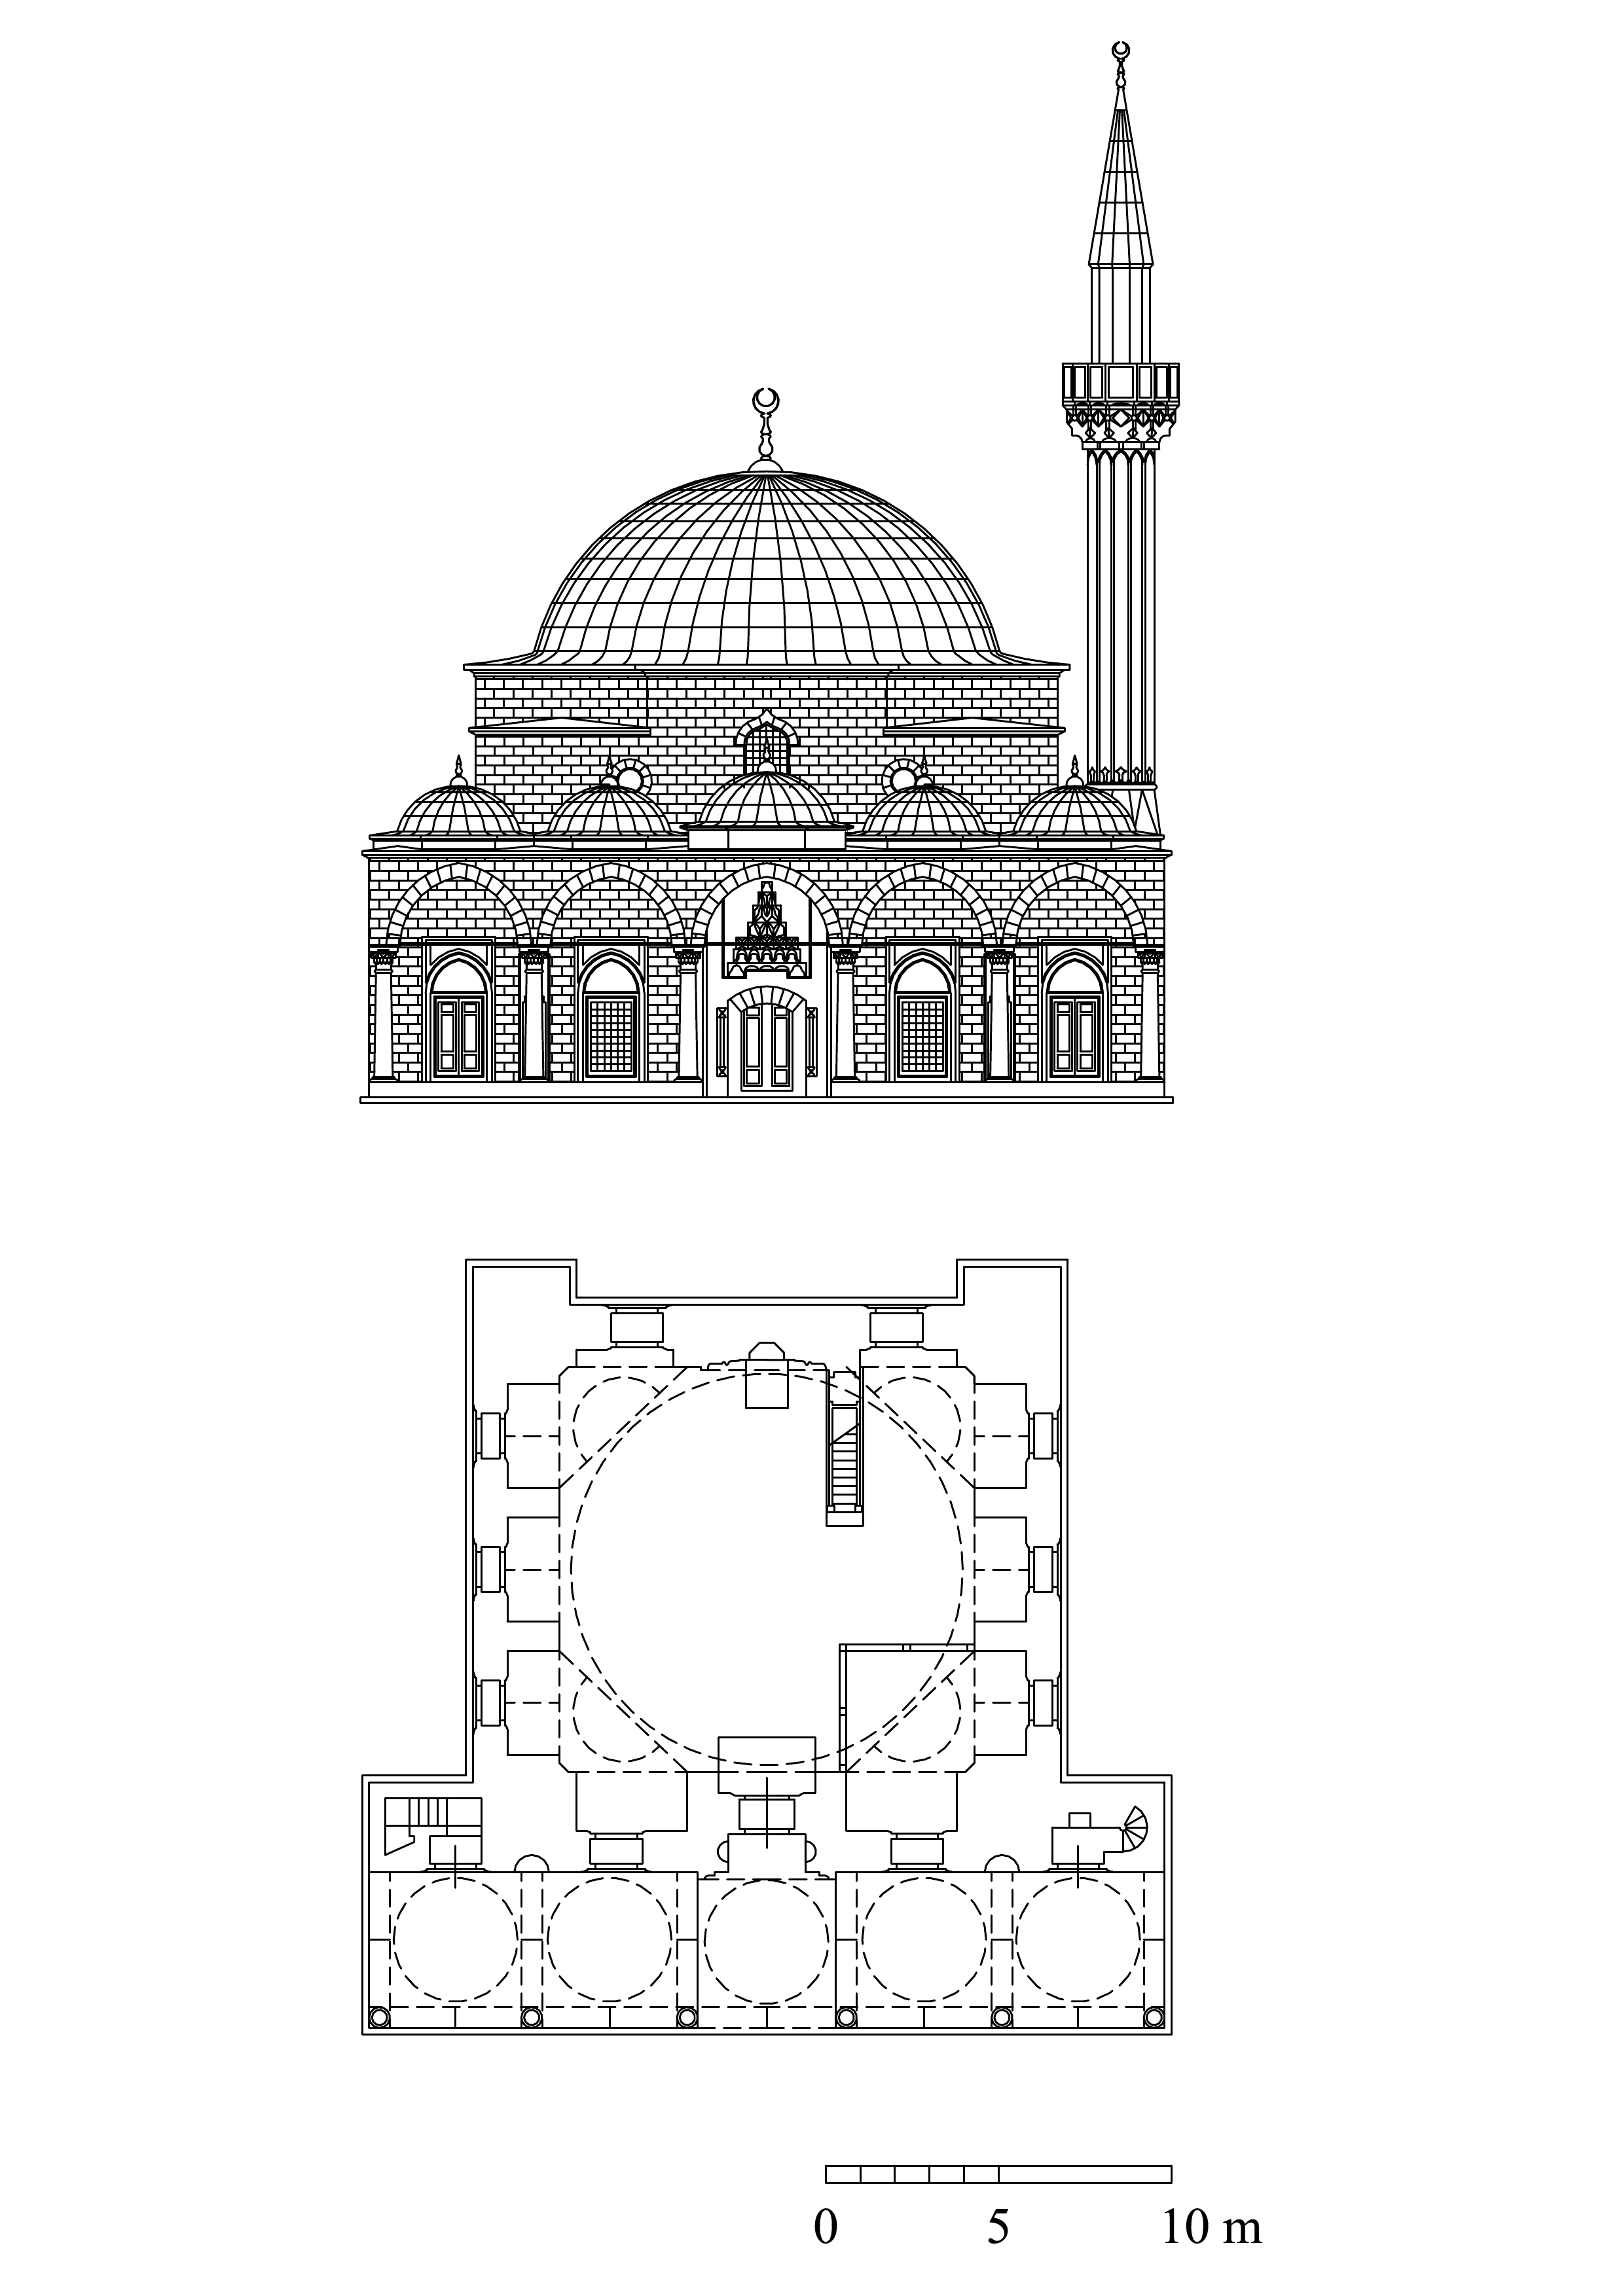 Bali Pasa Mosque - Floor plan and elevation. DWG file in AutoCAD 2000 format. Click the download button to download a zipped file containing the .dwg file.